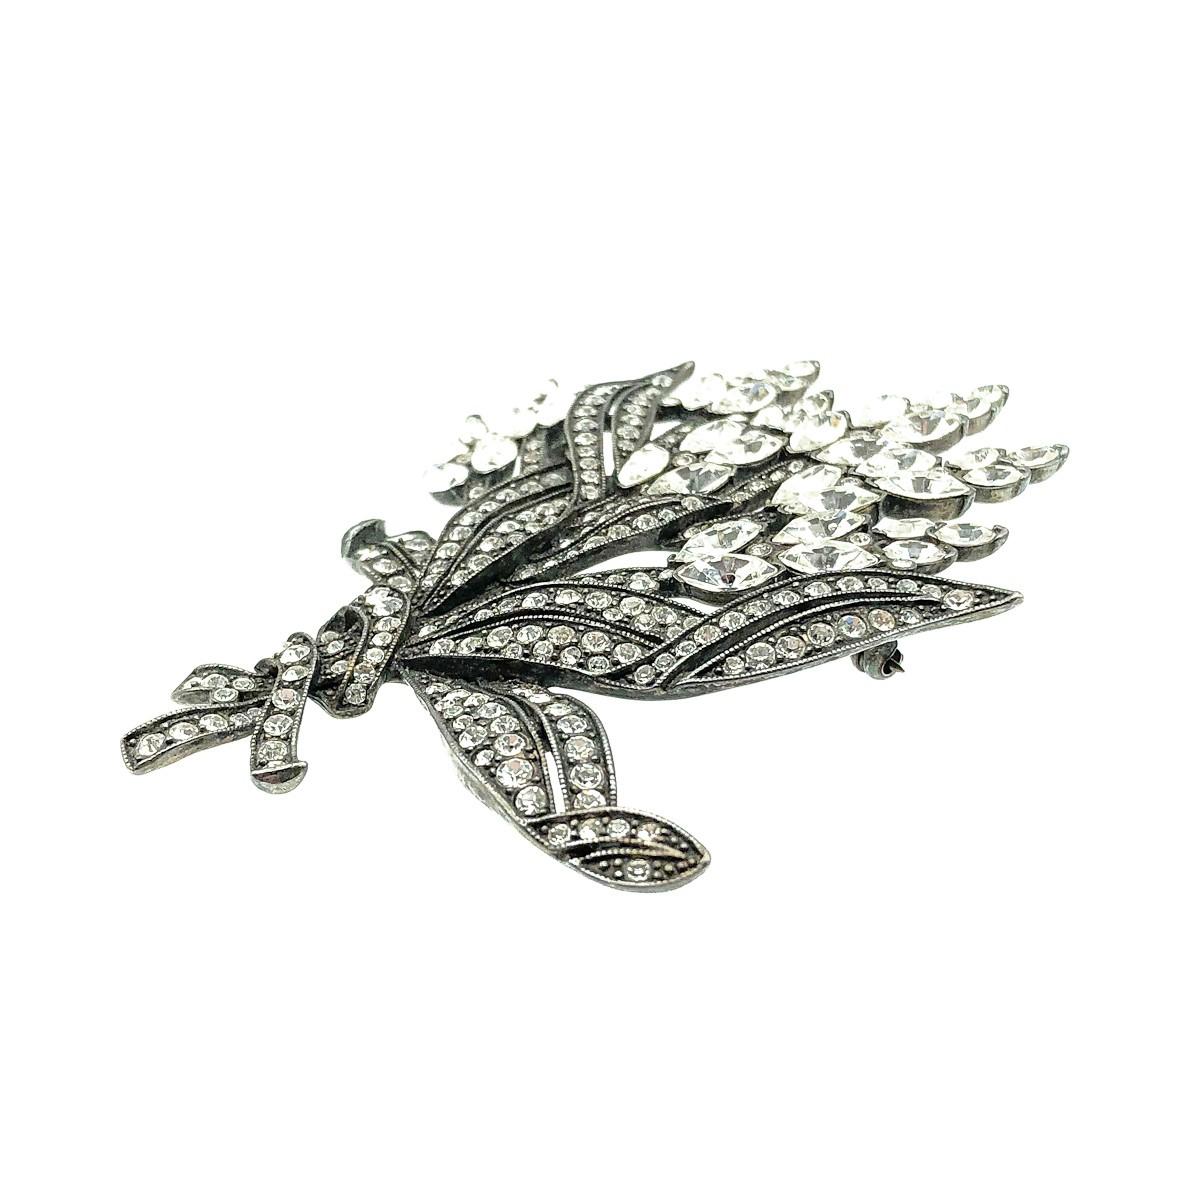 An impressive Vintage Monet Floral Brooch. Crafted in blackened silver-tone metal and set with a glorious array of crystals. Signed, in very good vintage condition, approx. 8.5cm. A beautiful statement floral pin that oozes glam and style.